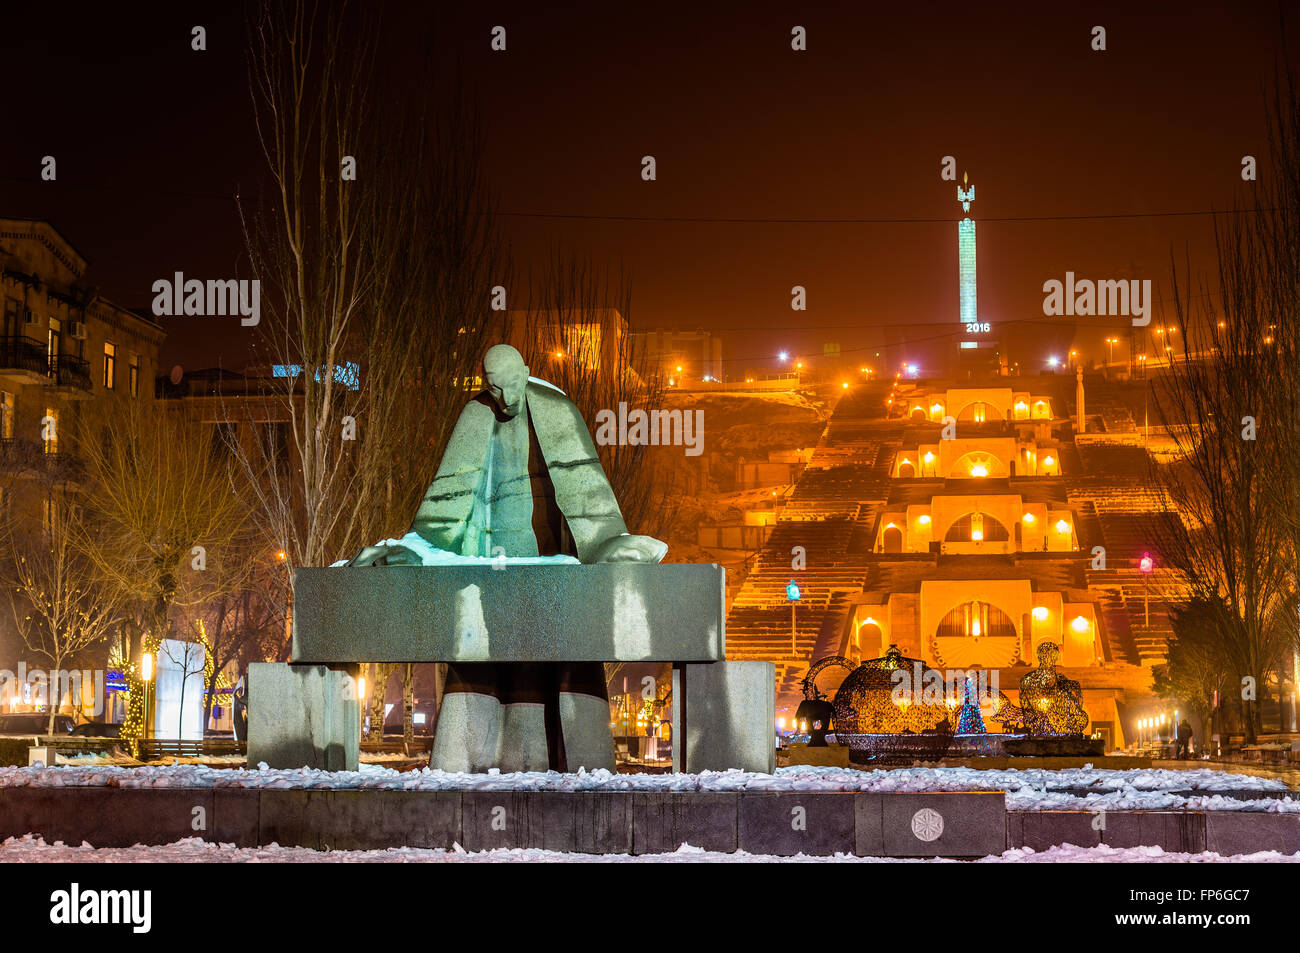 Statue of Alexander Tamanian and Cascade Alley in Yerevan Stock Photo